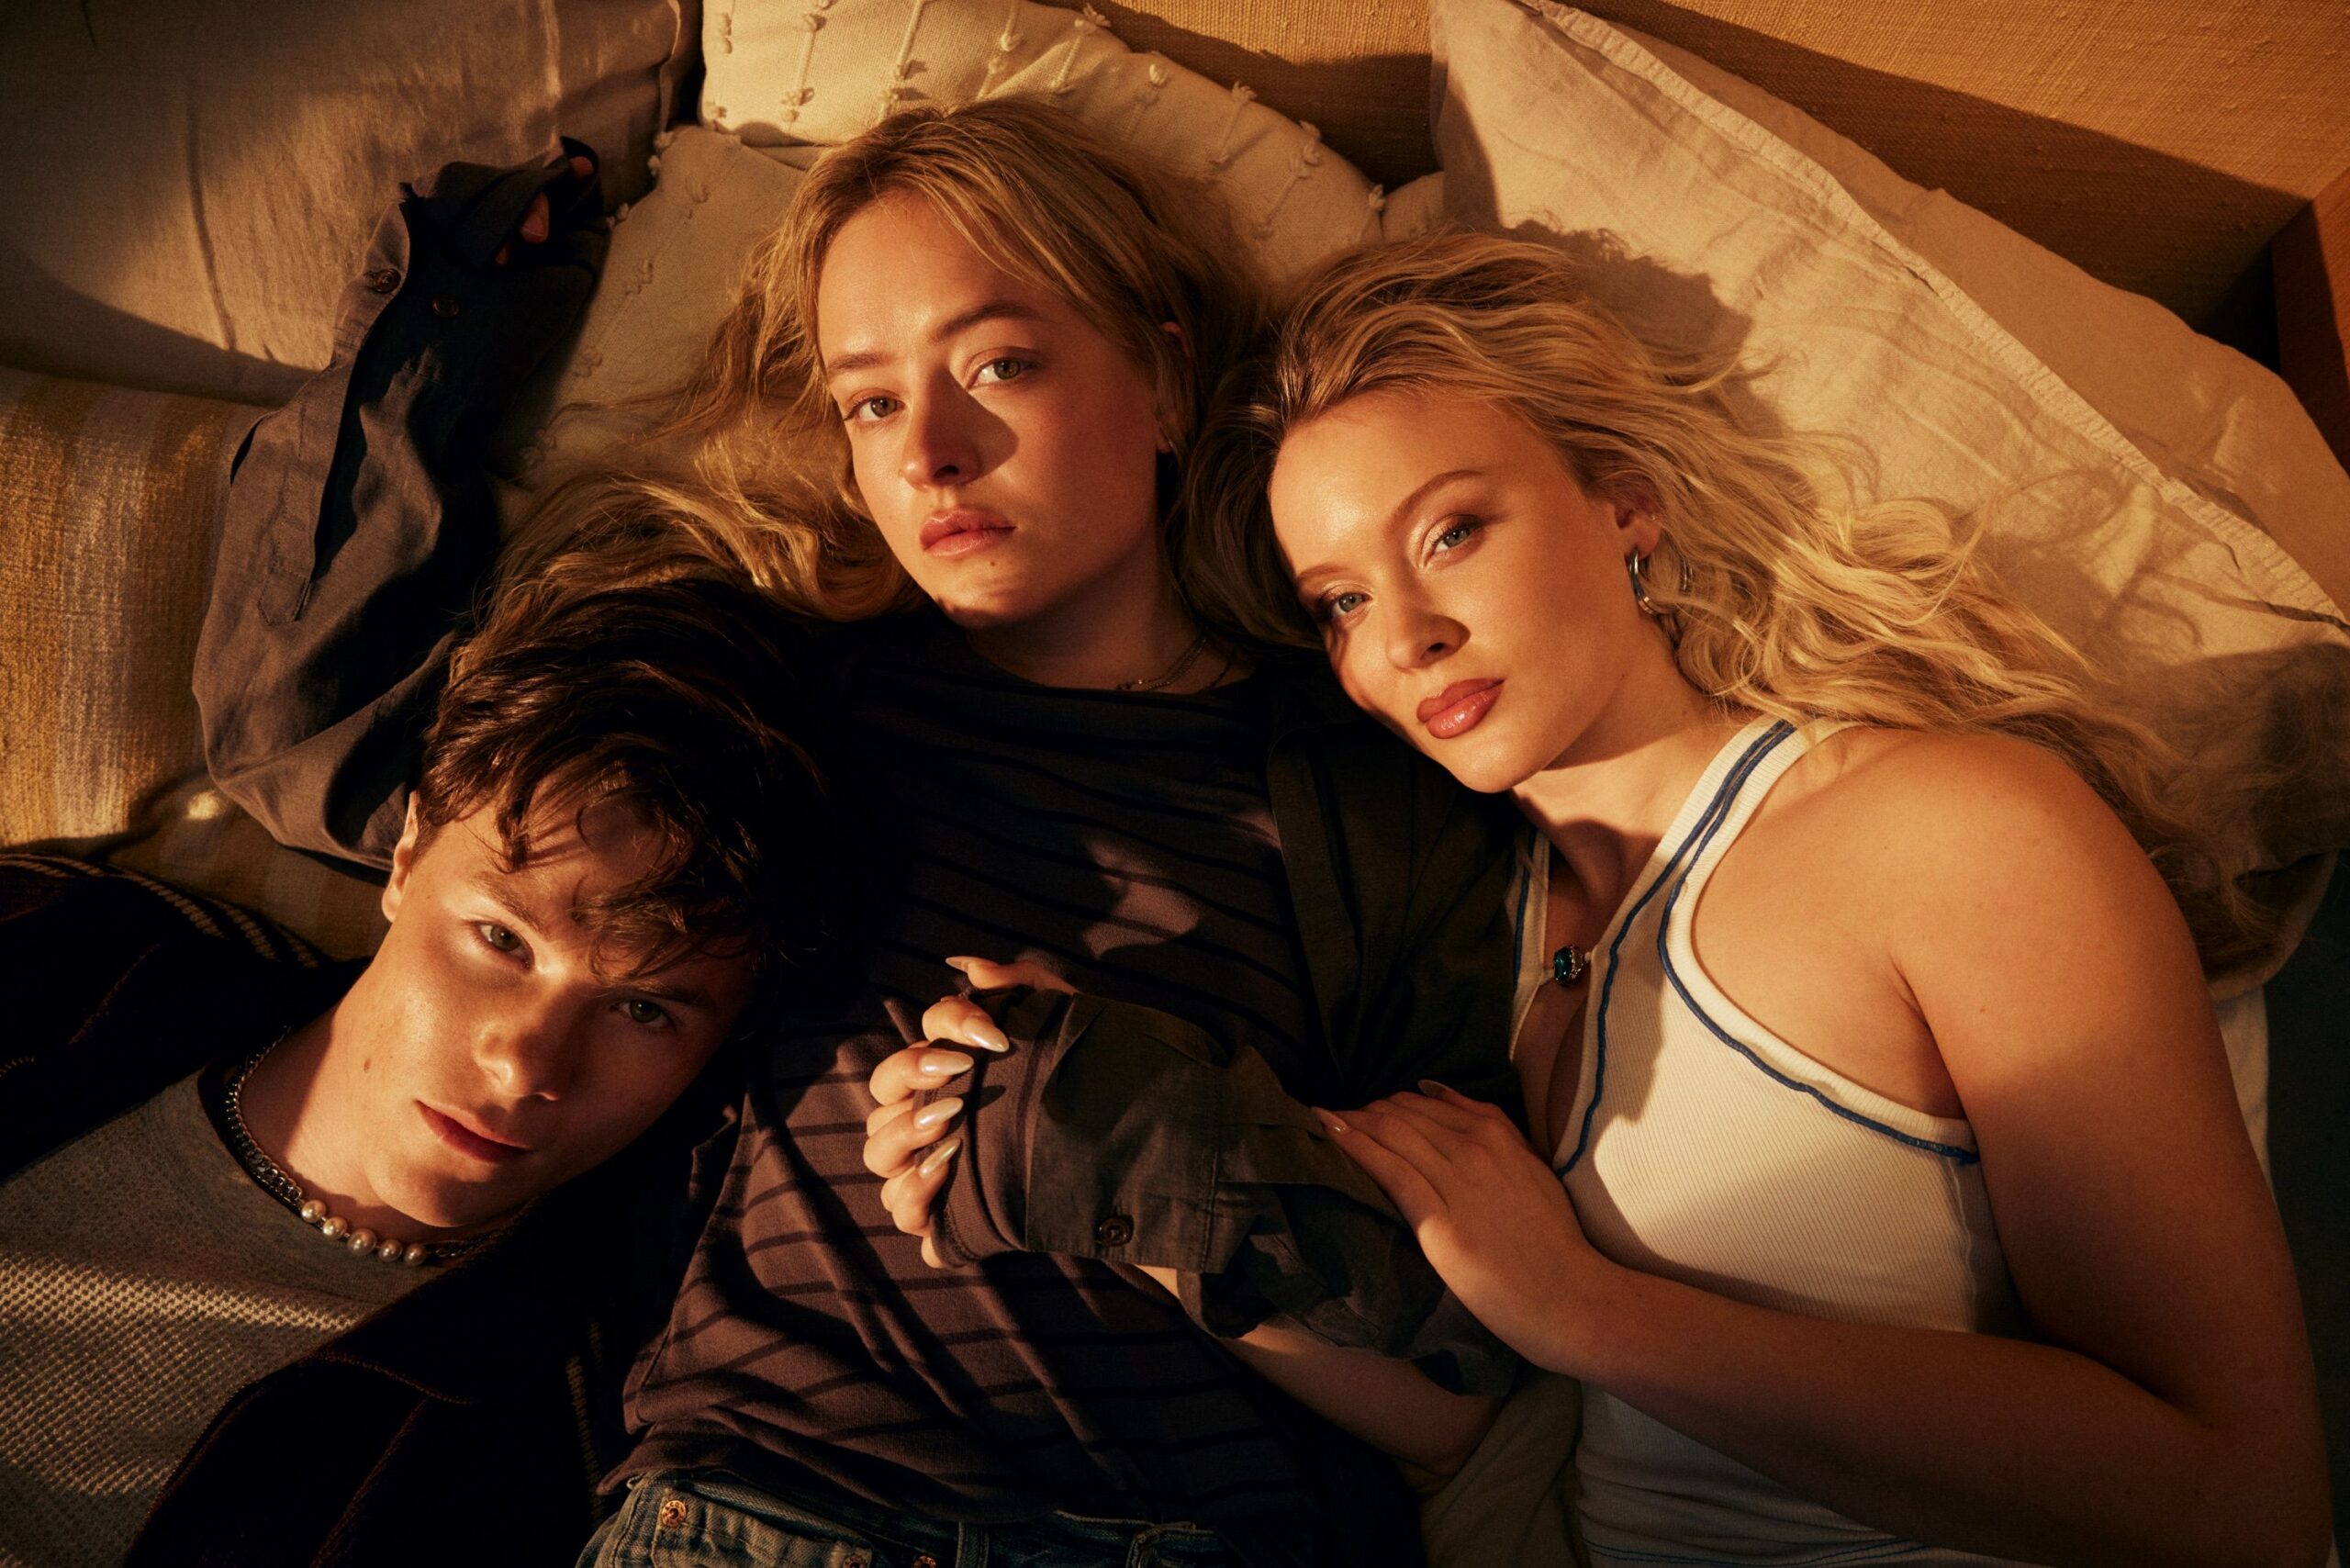 A Part of You Starring Felicia Maxime, Edvin Ryding and Zara Larsson in Leading Roles Debuts May 31